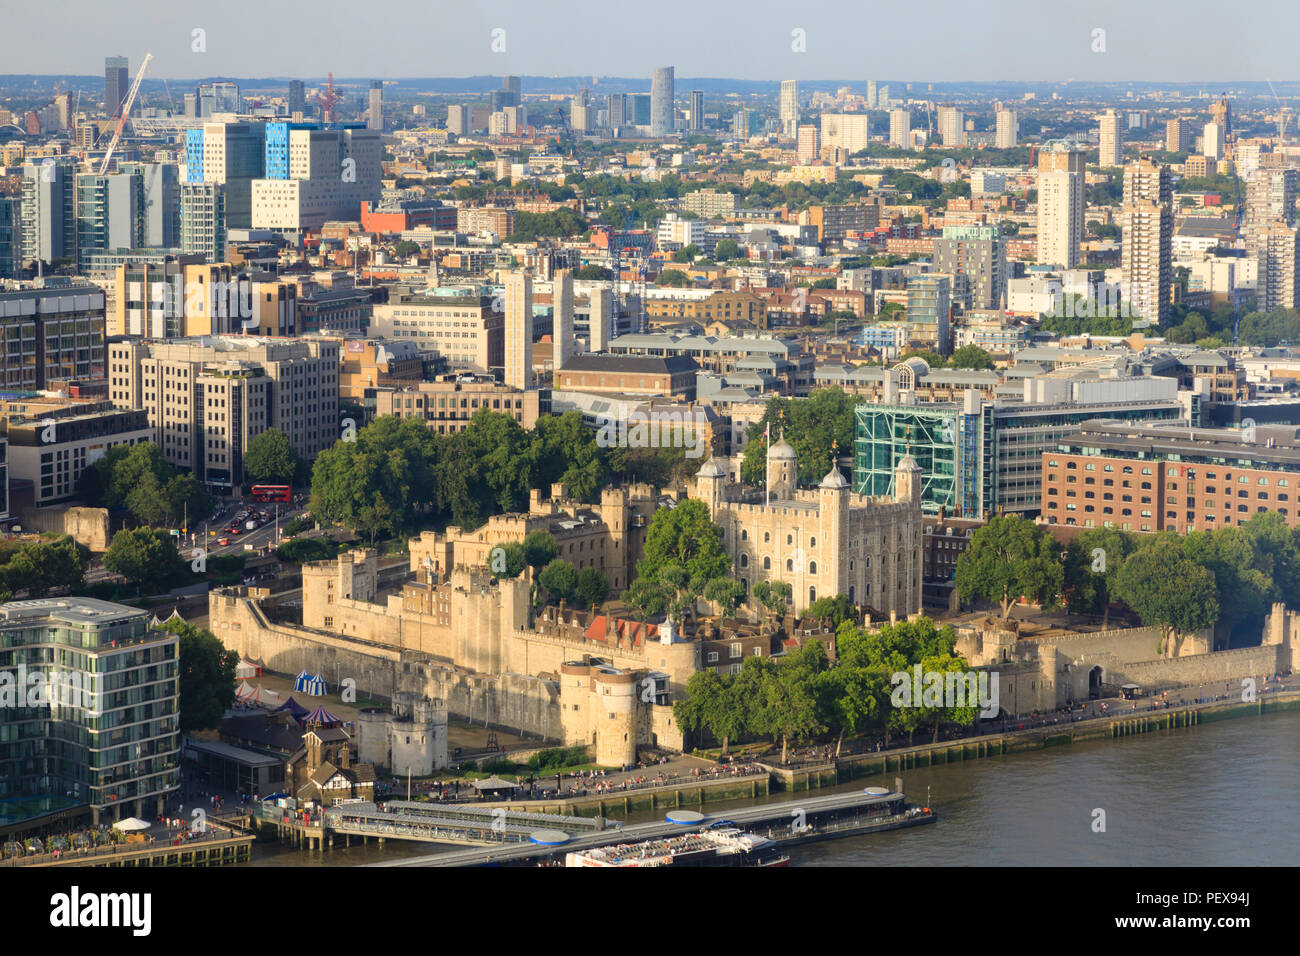 The Tower of London on the banks of the River Thames. England Stock Photo